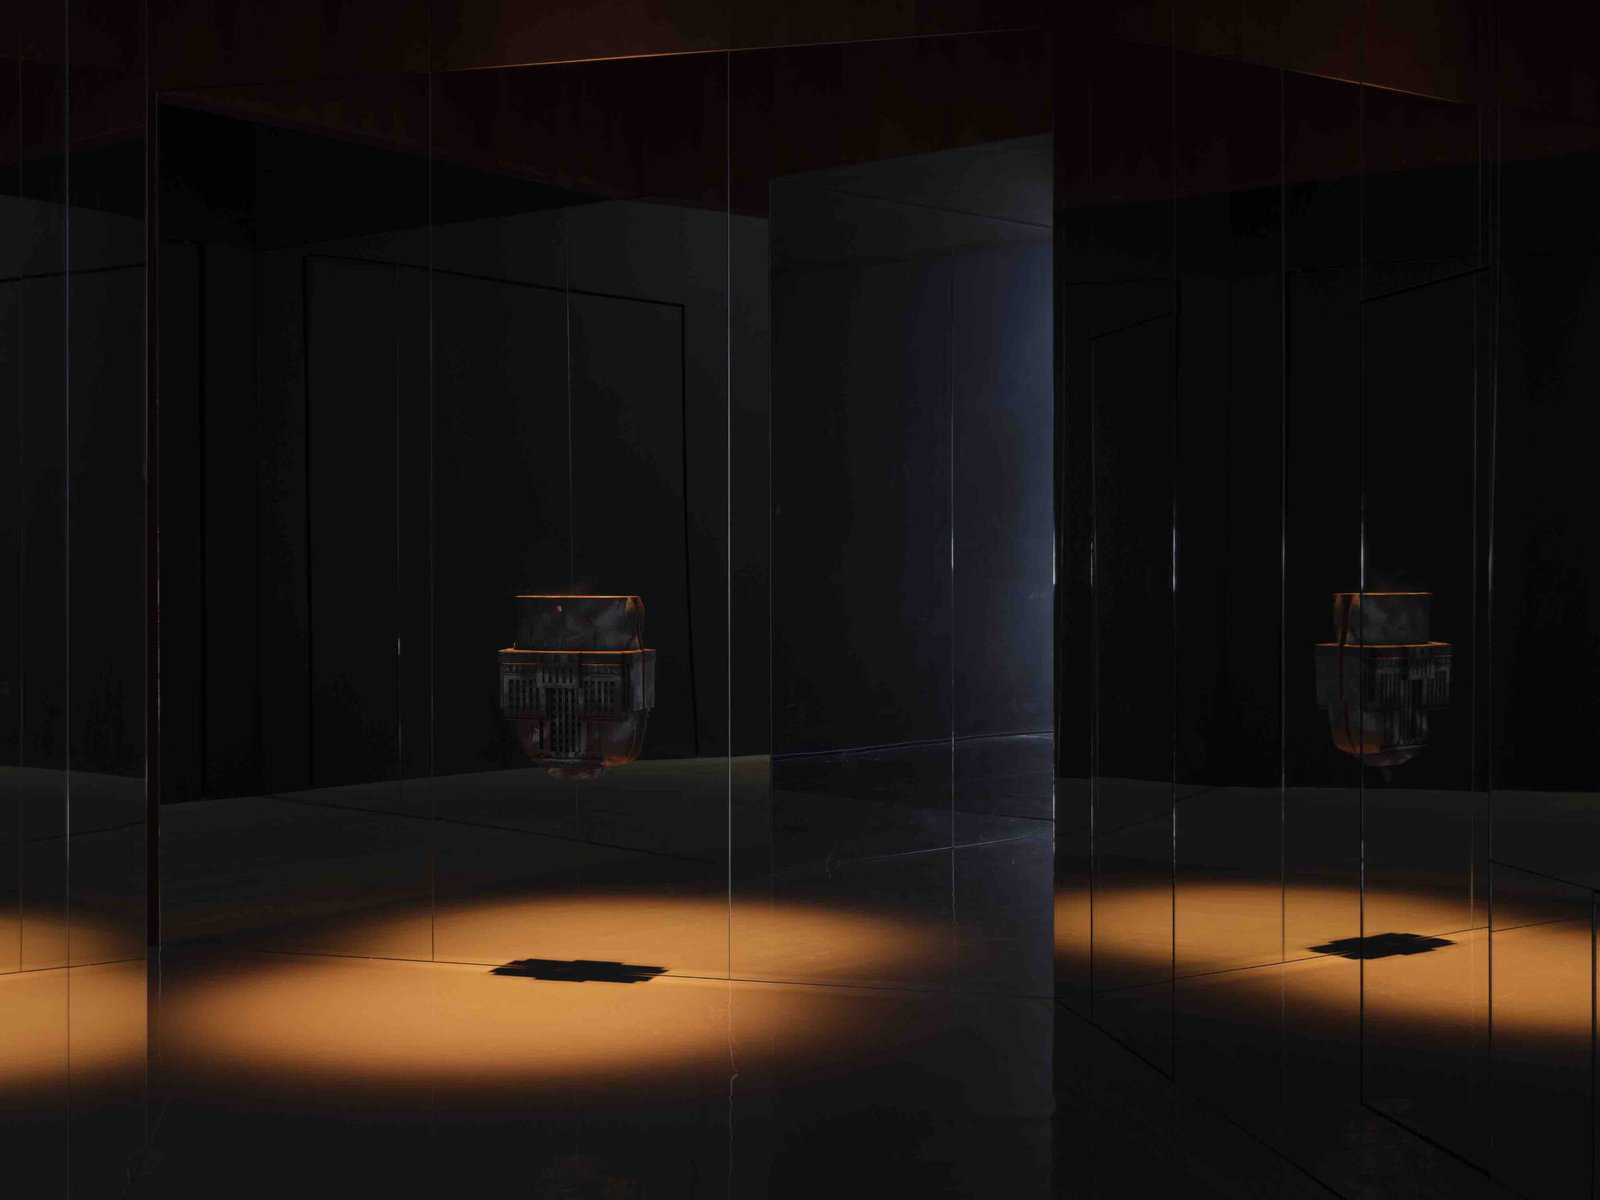 Samson Young's work pp, 2022. Installation view of Myth Makers—Spectrosynthesis III. Photography: South Ho, image courtesy of Sunpride Foundation.